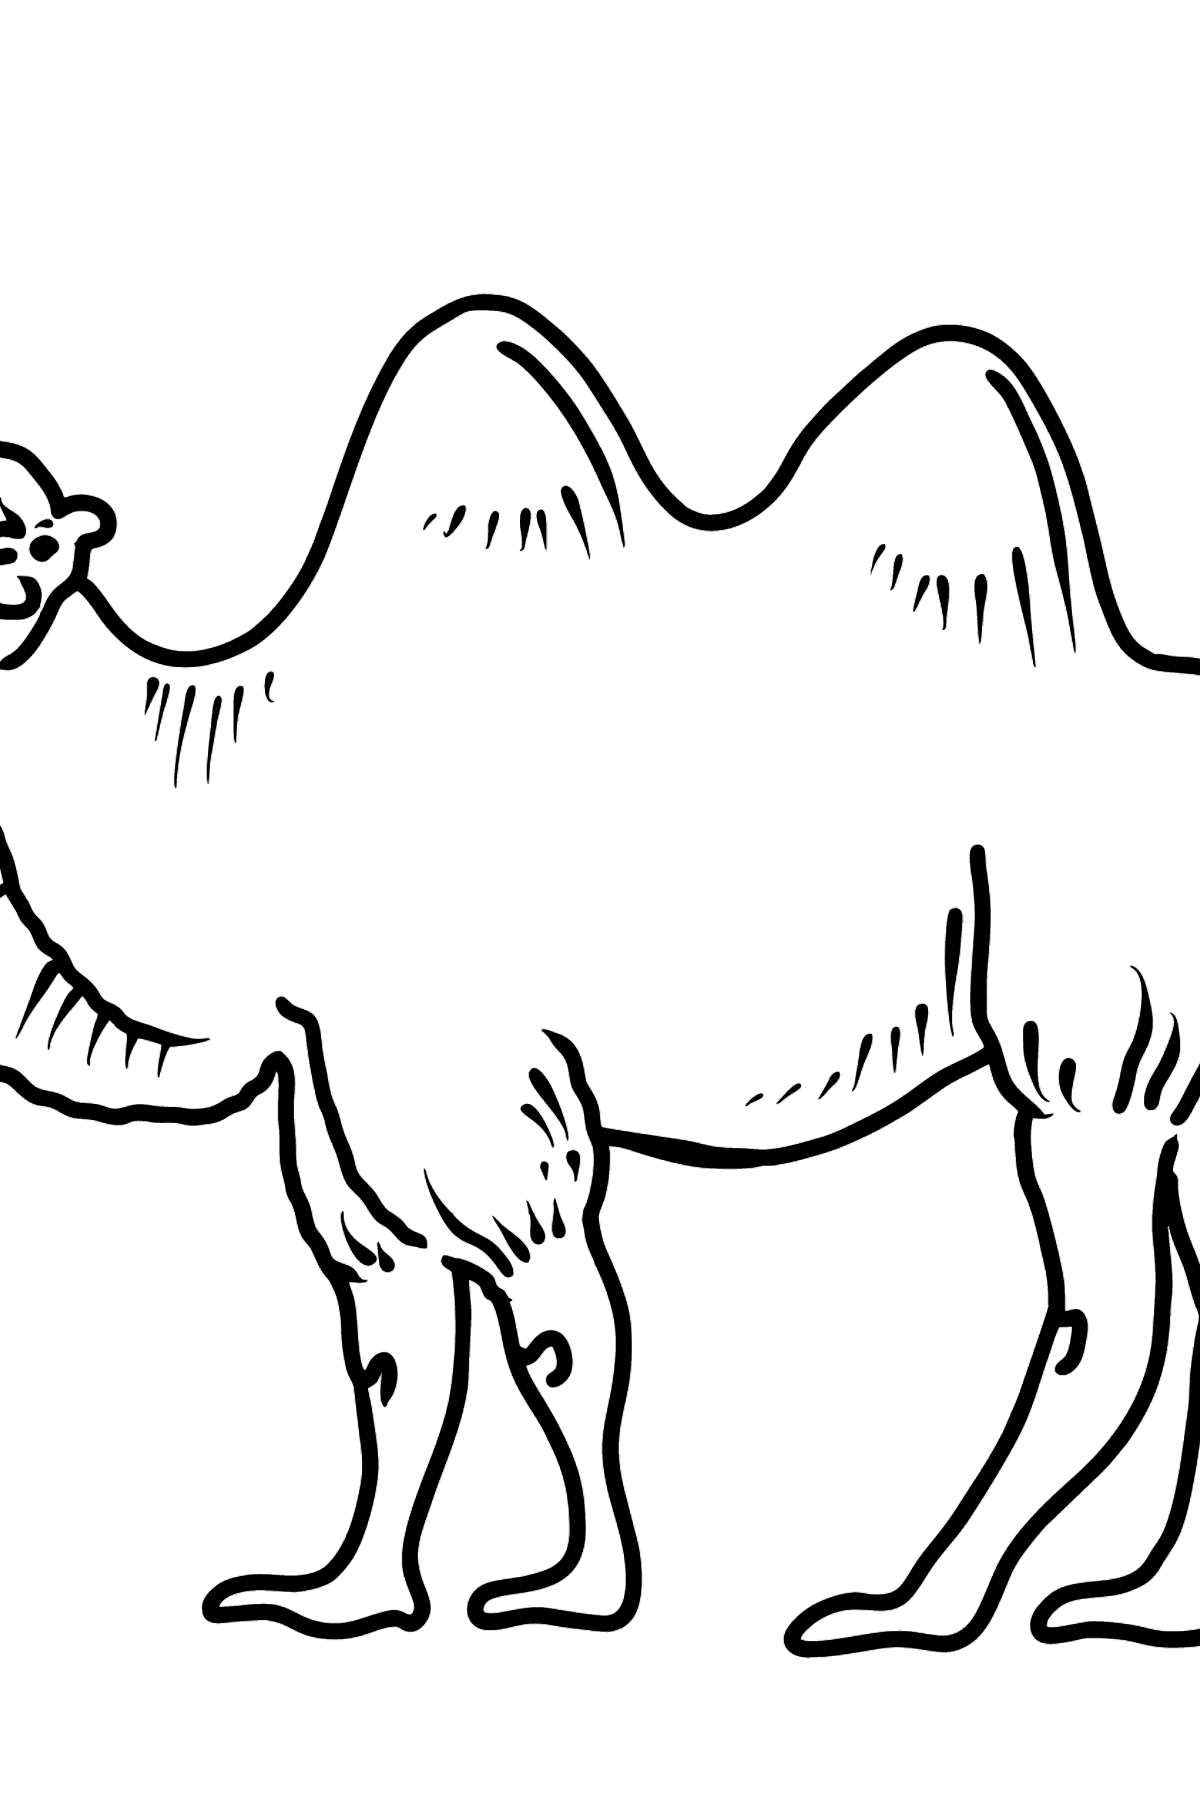 Camel coloring page - Coloring Pages for Kids